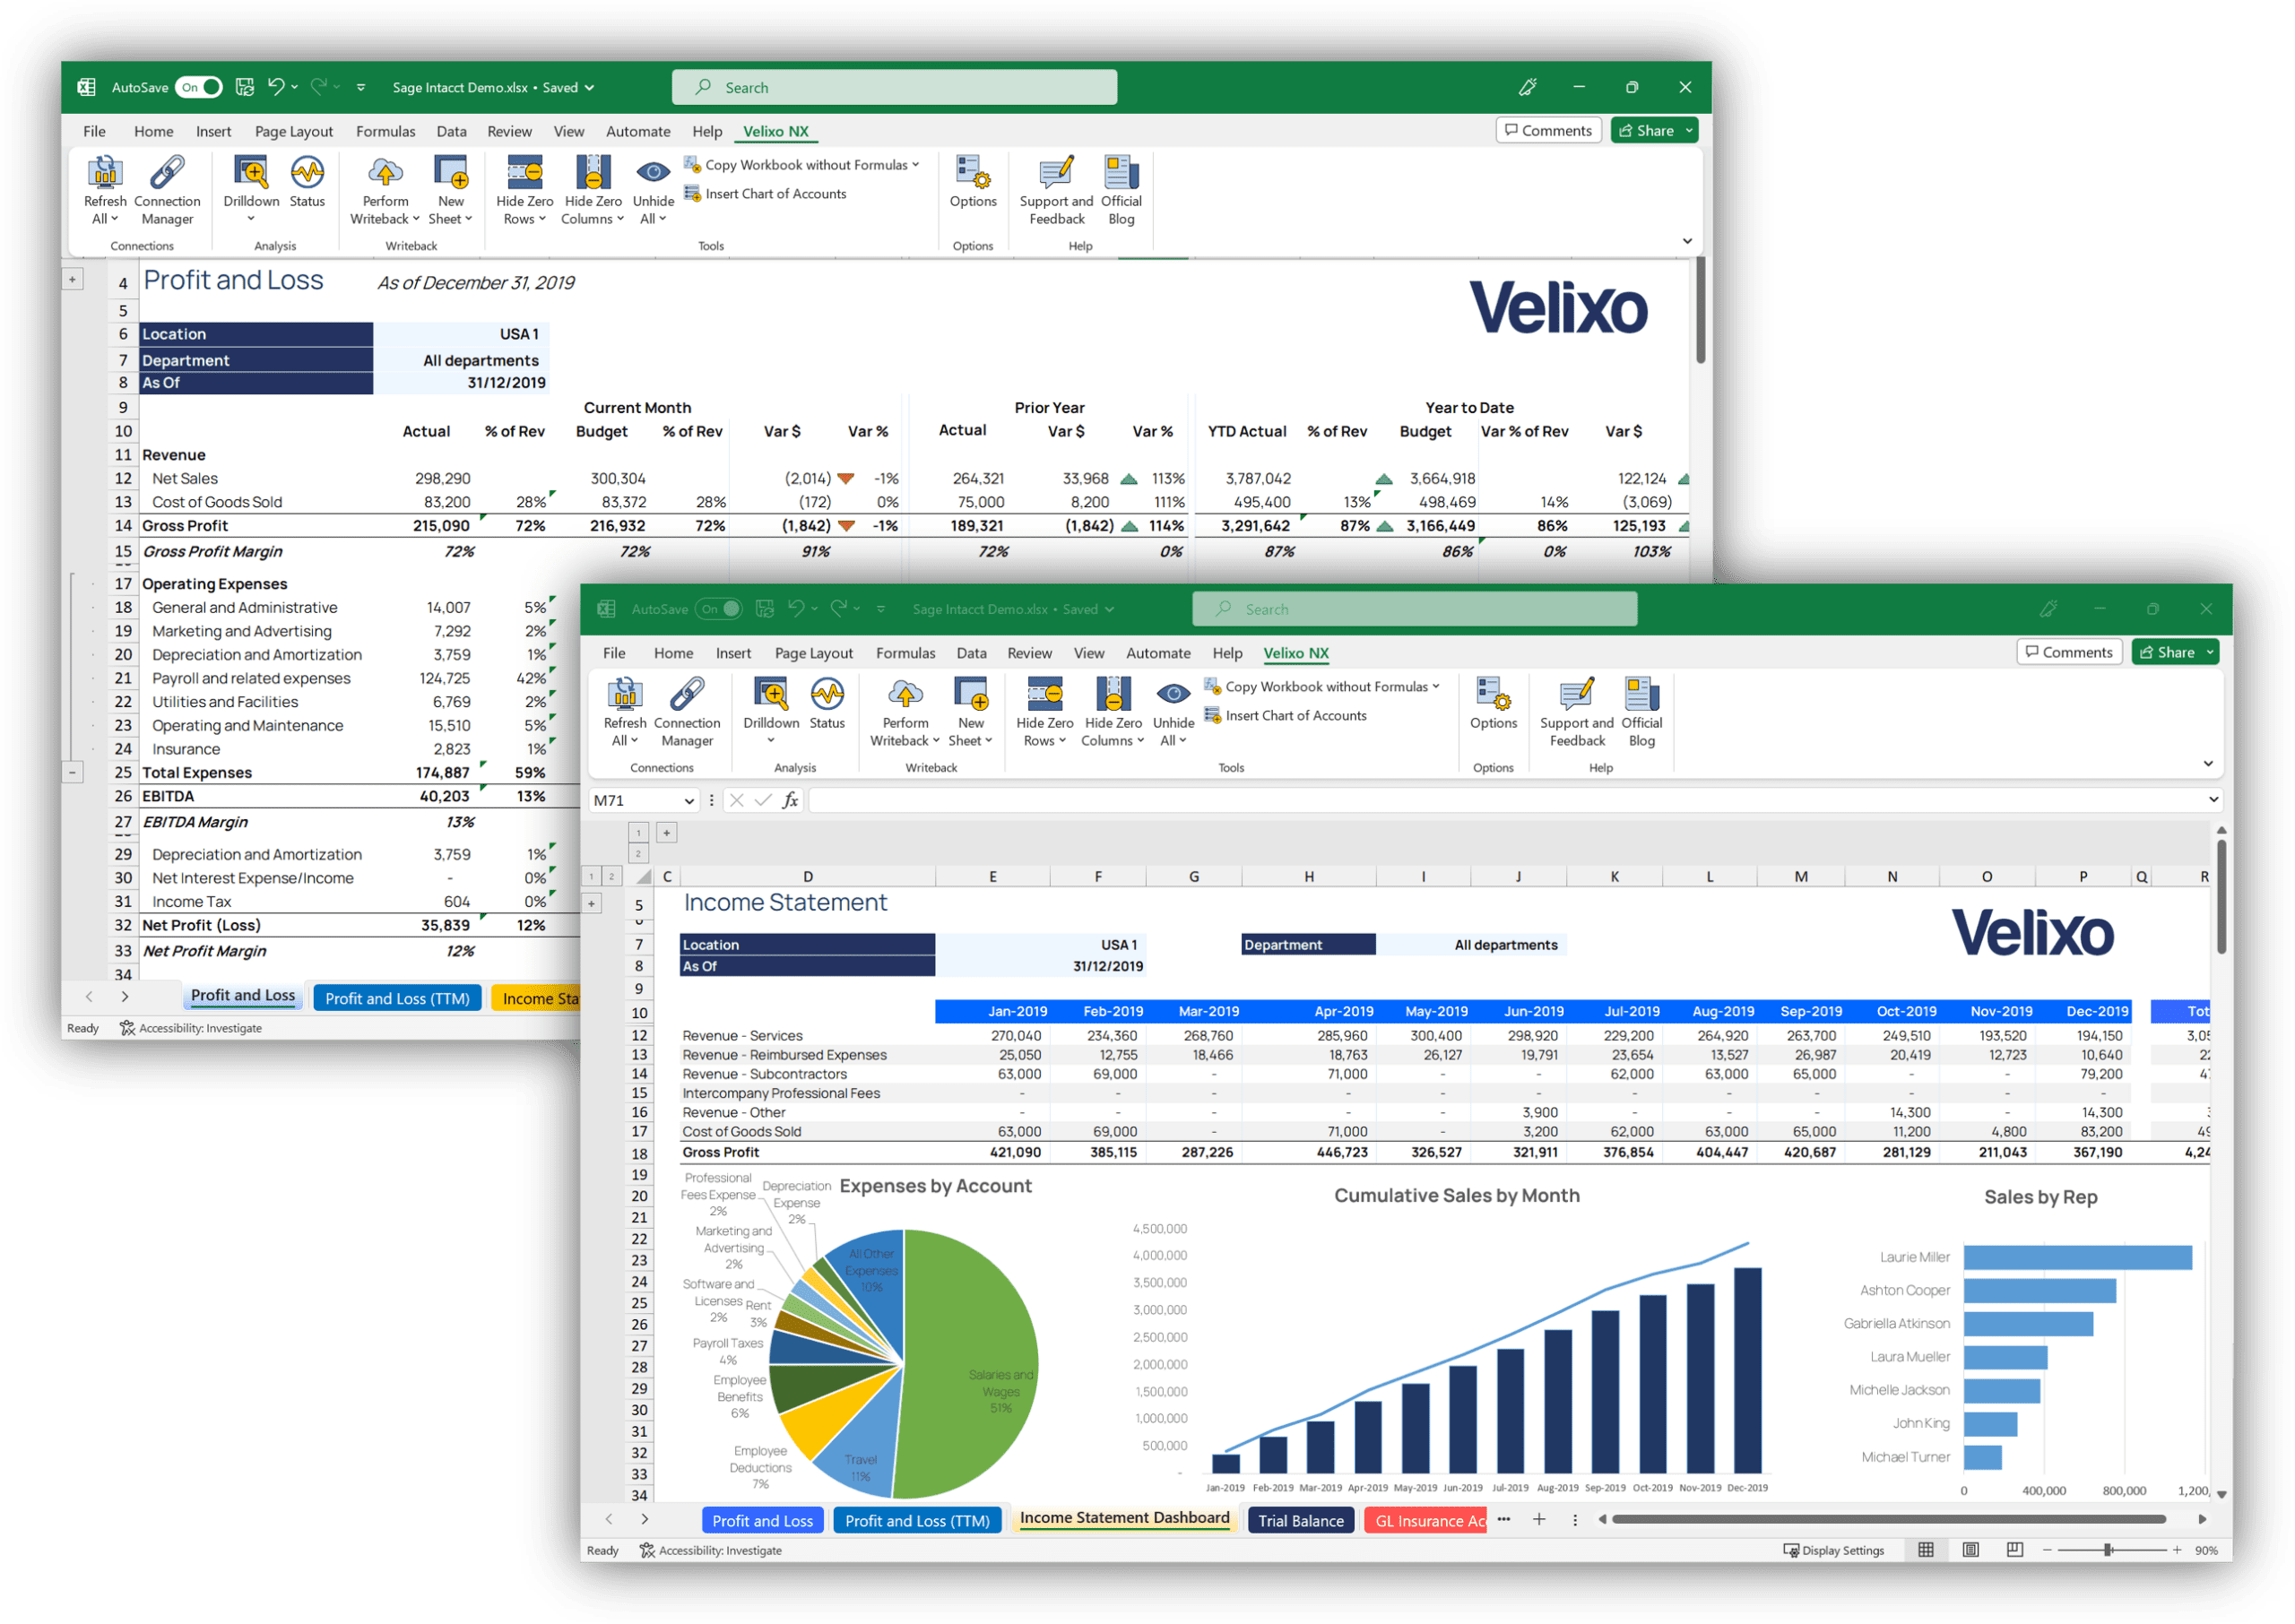 Excel Reporting Budgeting And Automation For Erps Velixo 1371